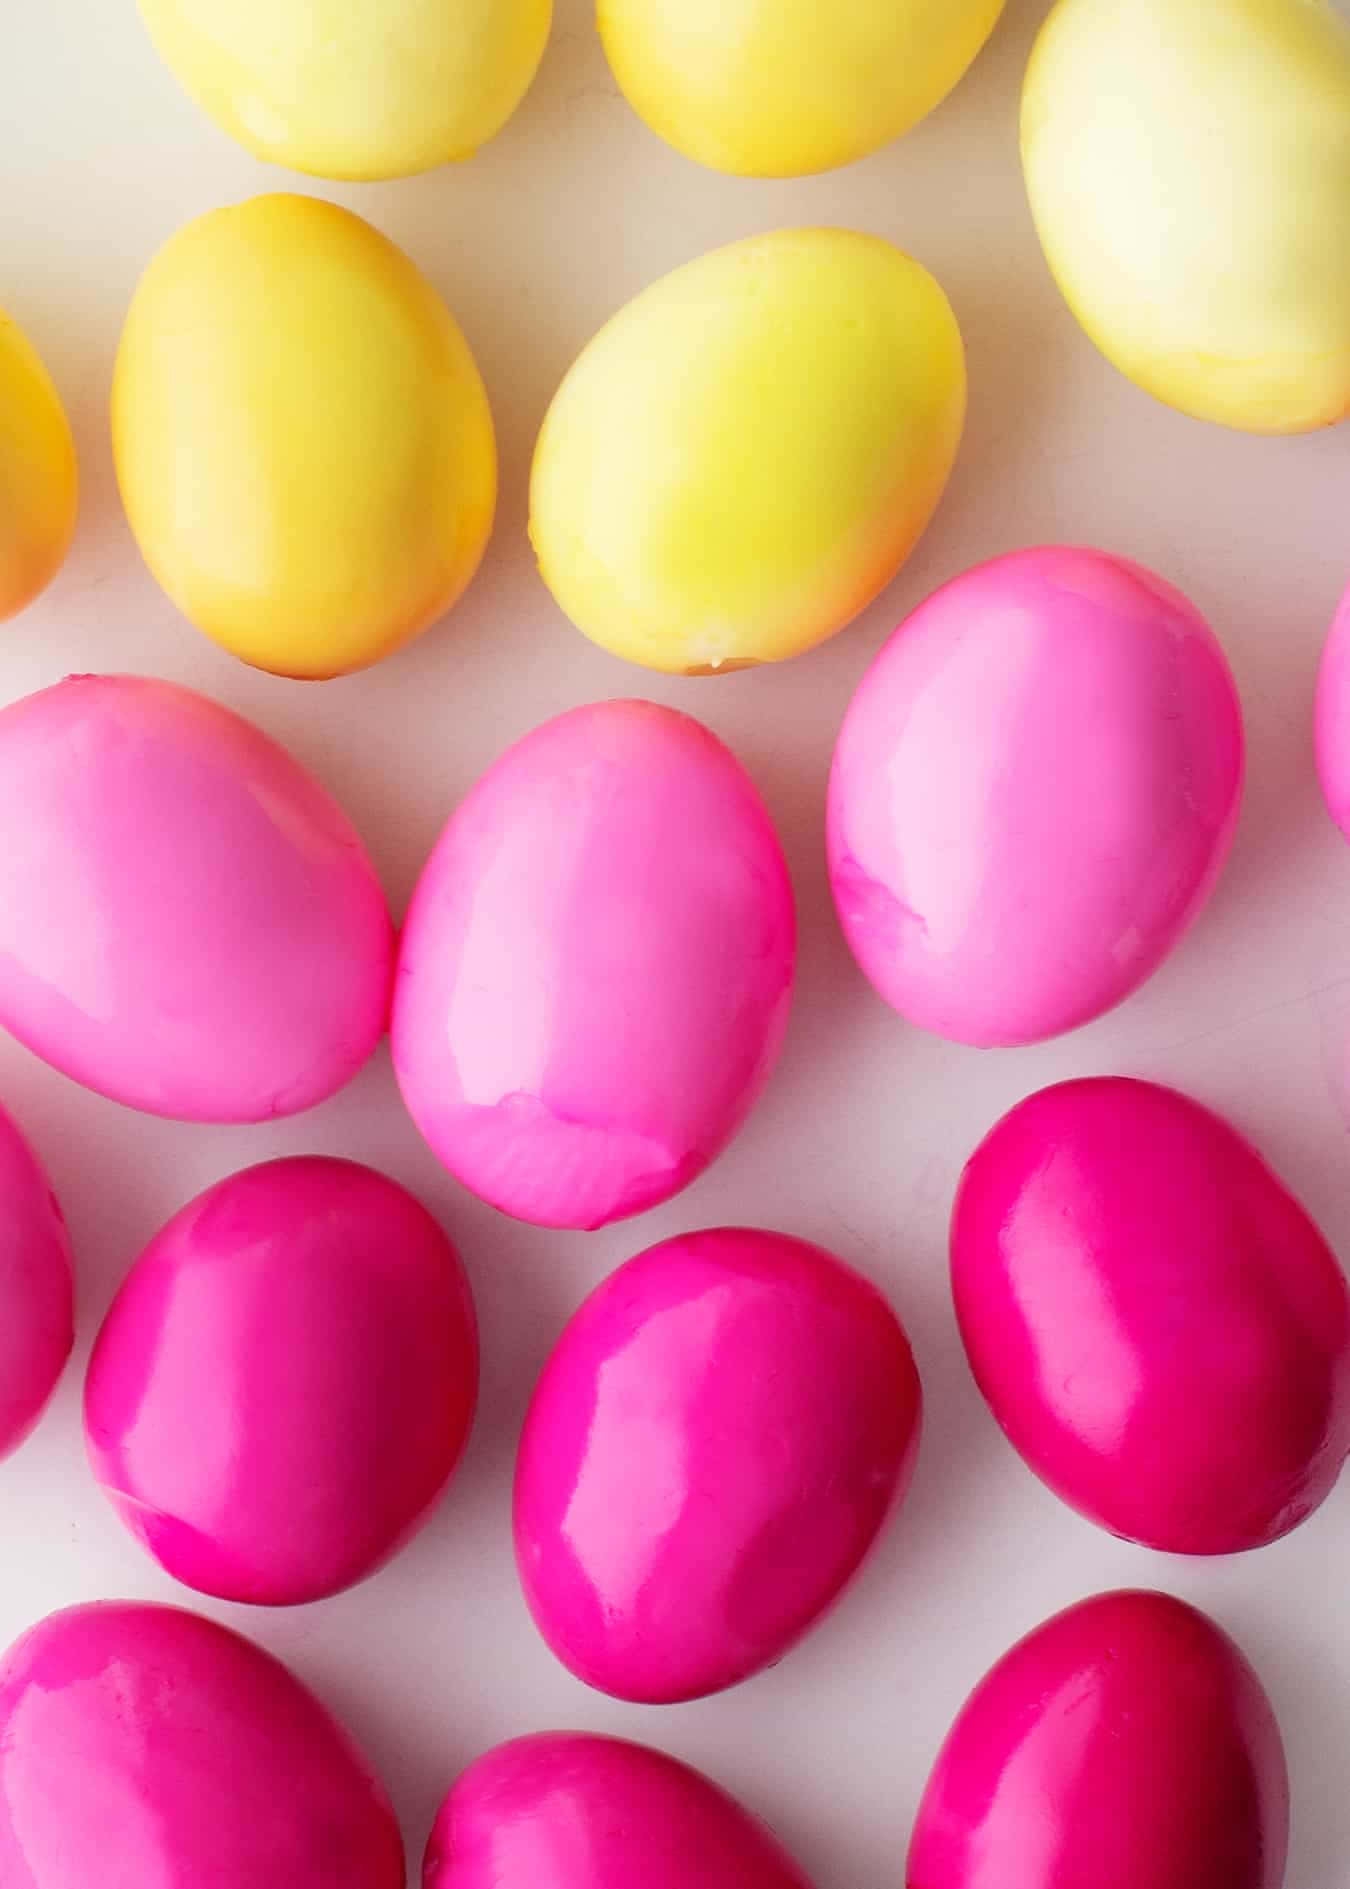 A Group Of Colorful Easter Eggs On A White Surface